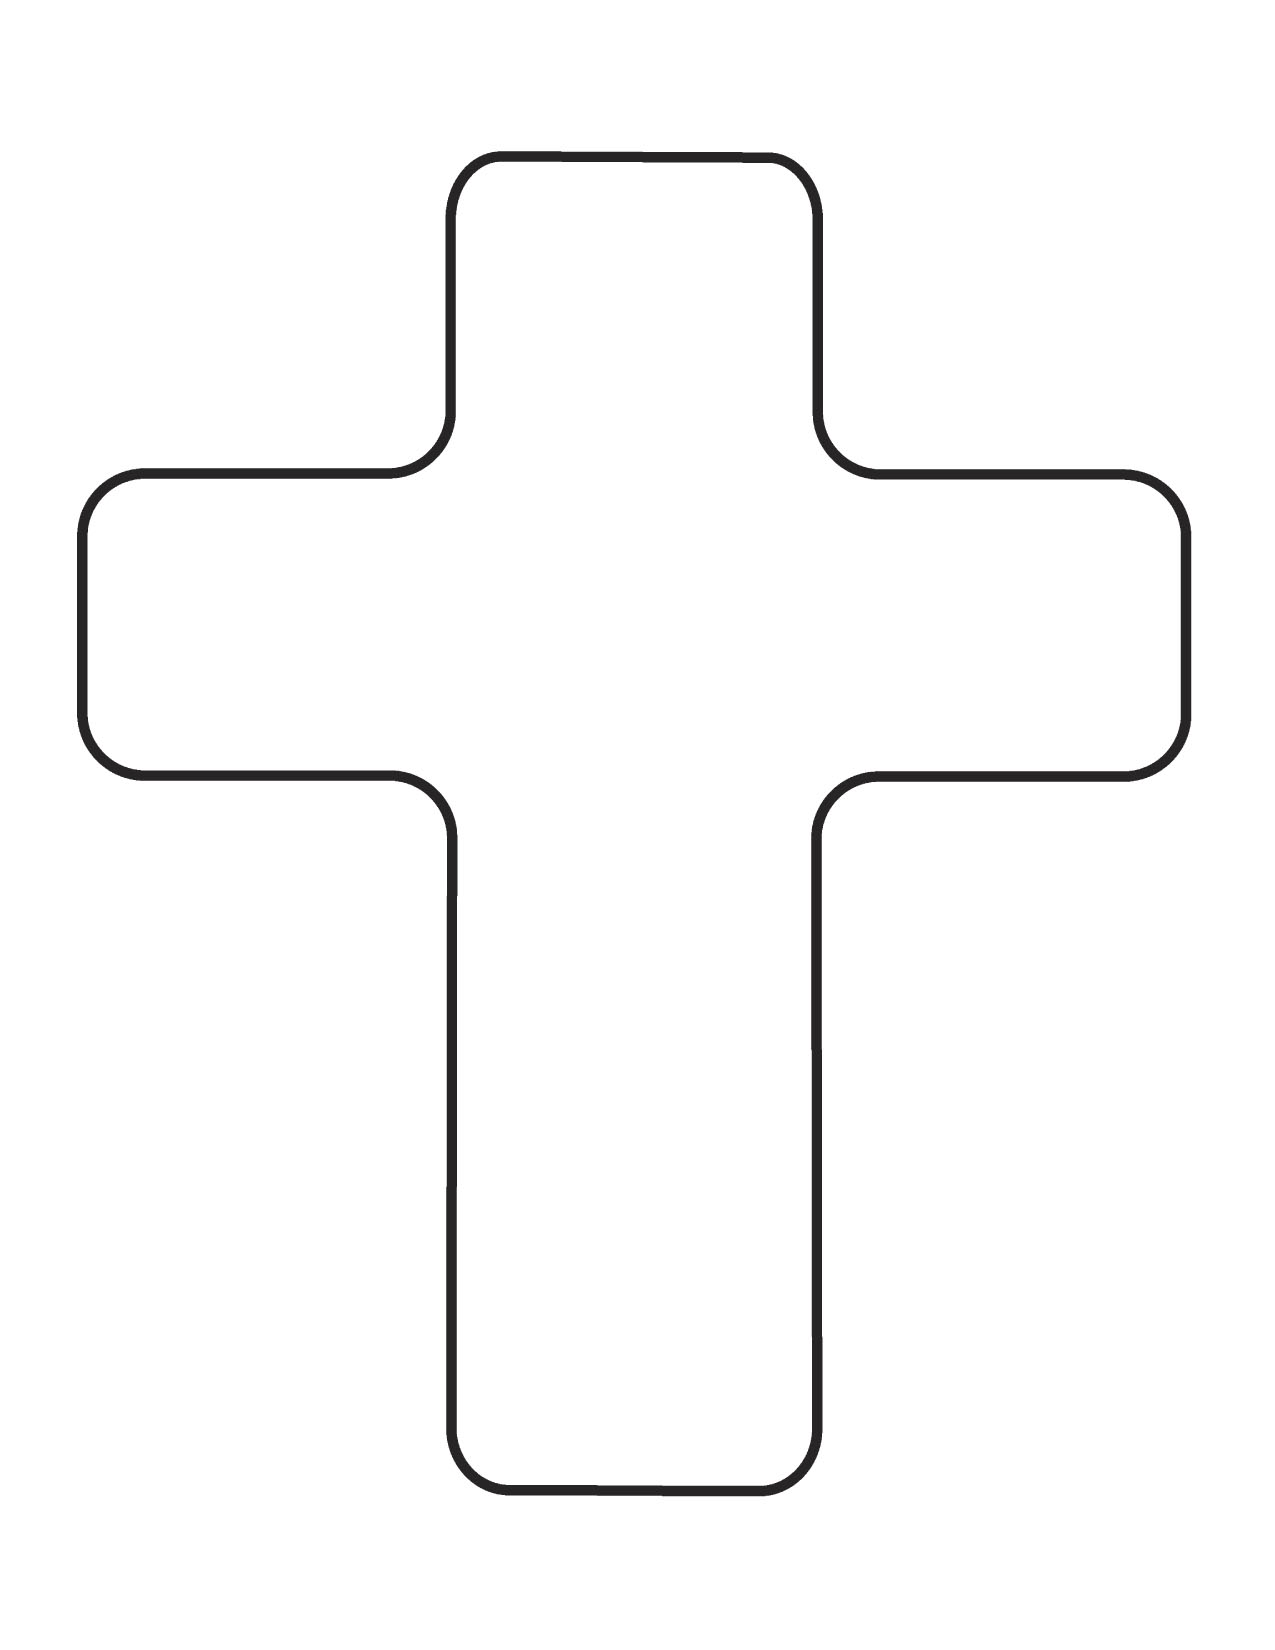 Crosses Clipart - Clipart library